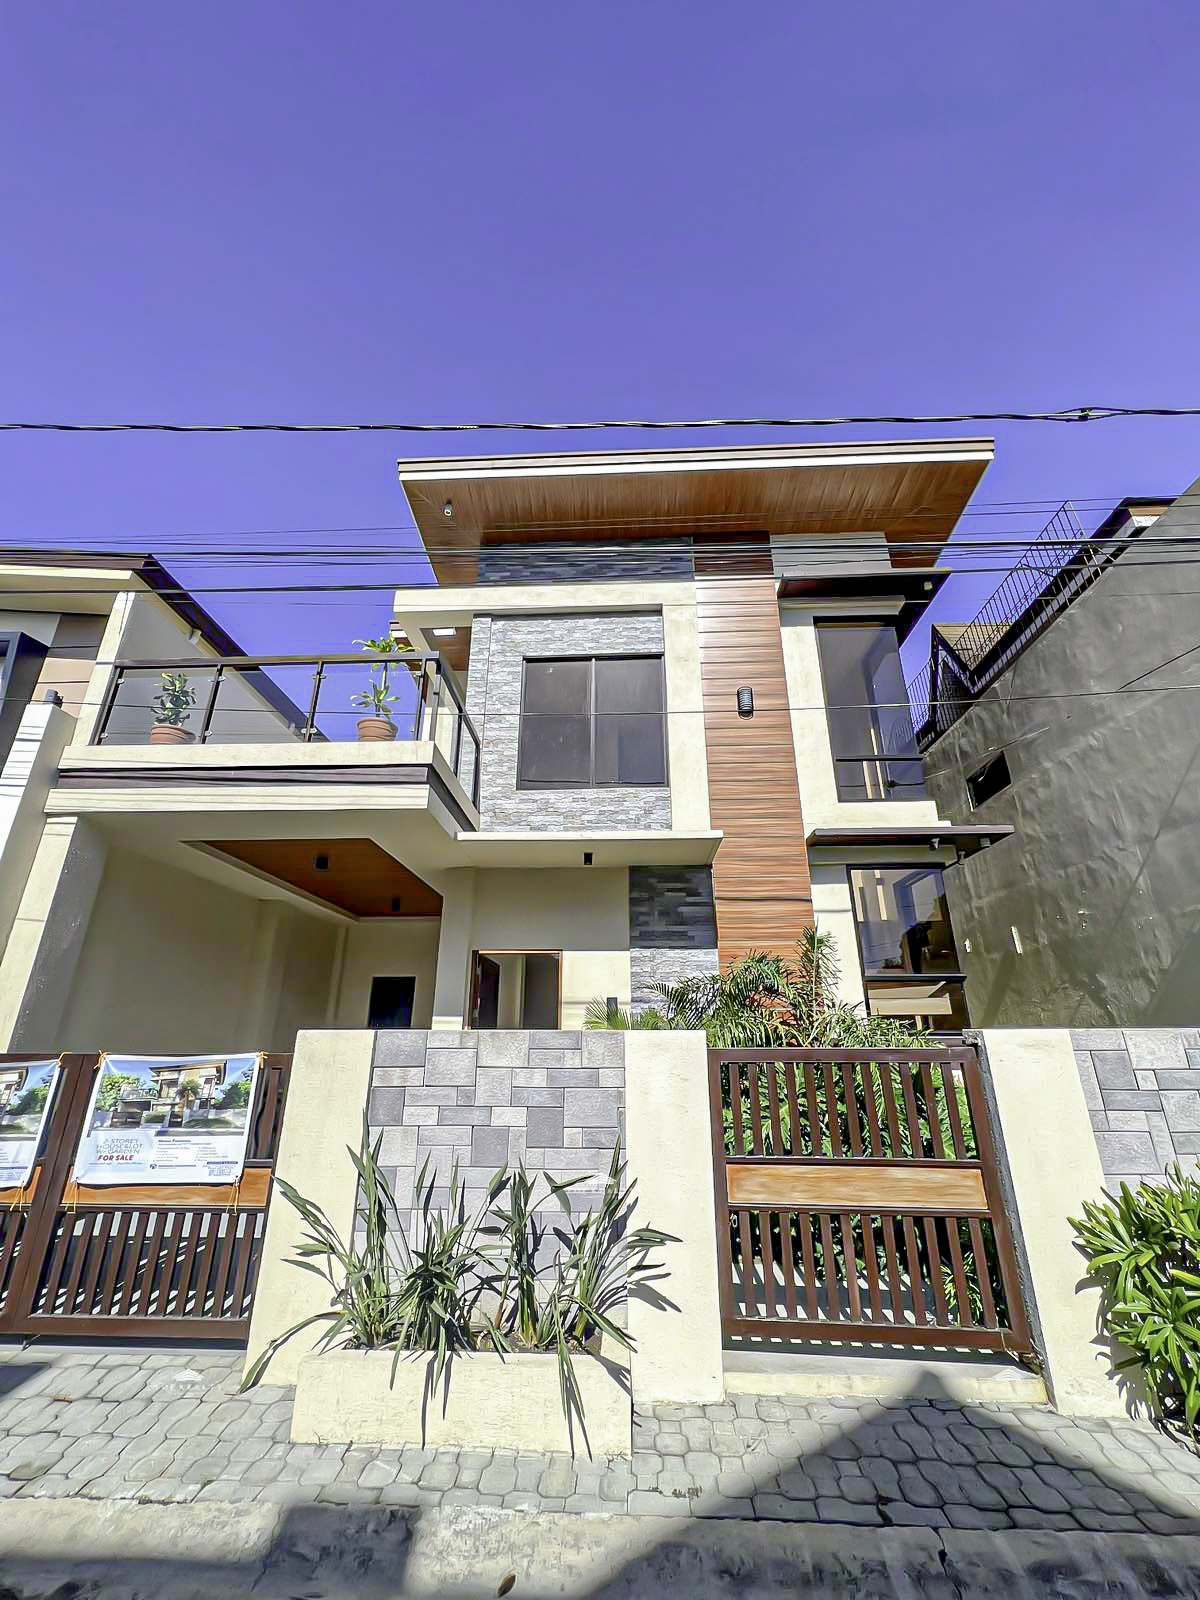 For Sale: 2 Storey 3BR House and Lot in ParkPlace Village, Cavite City